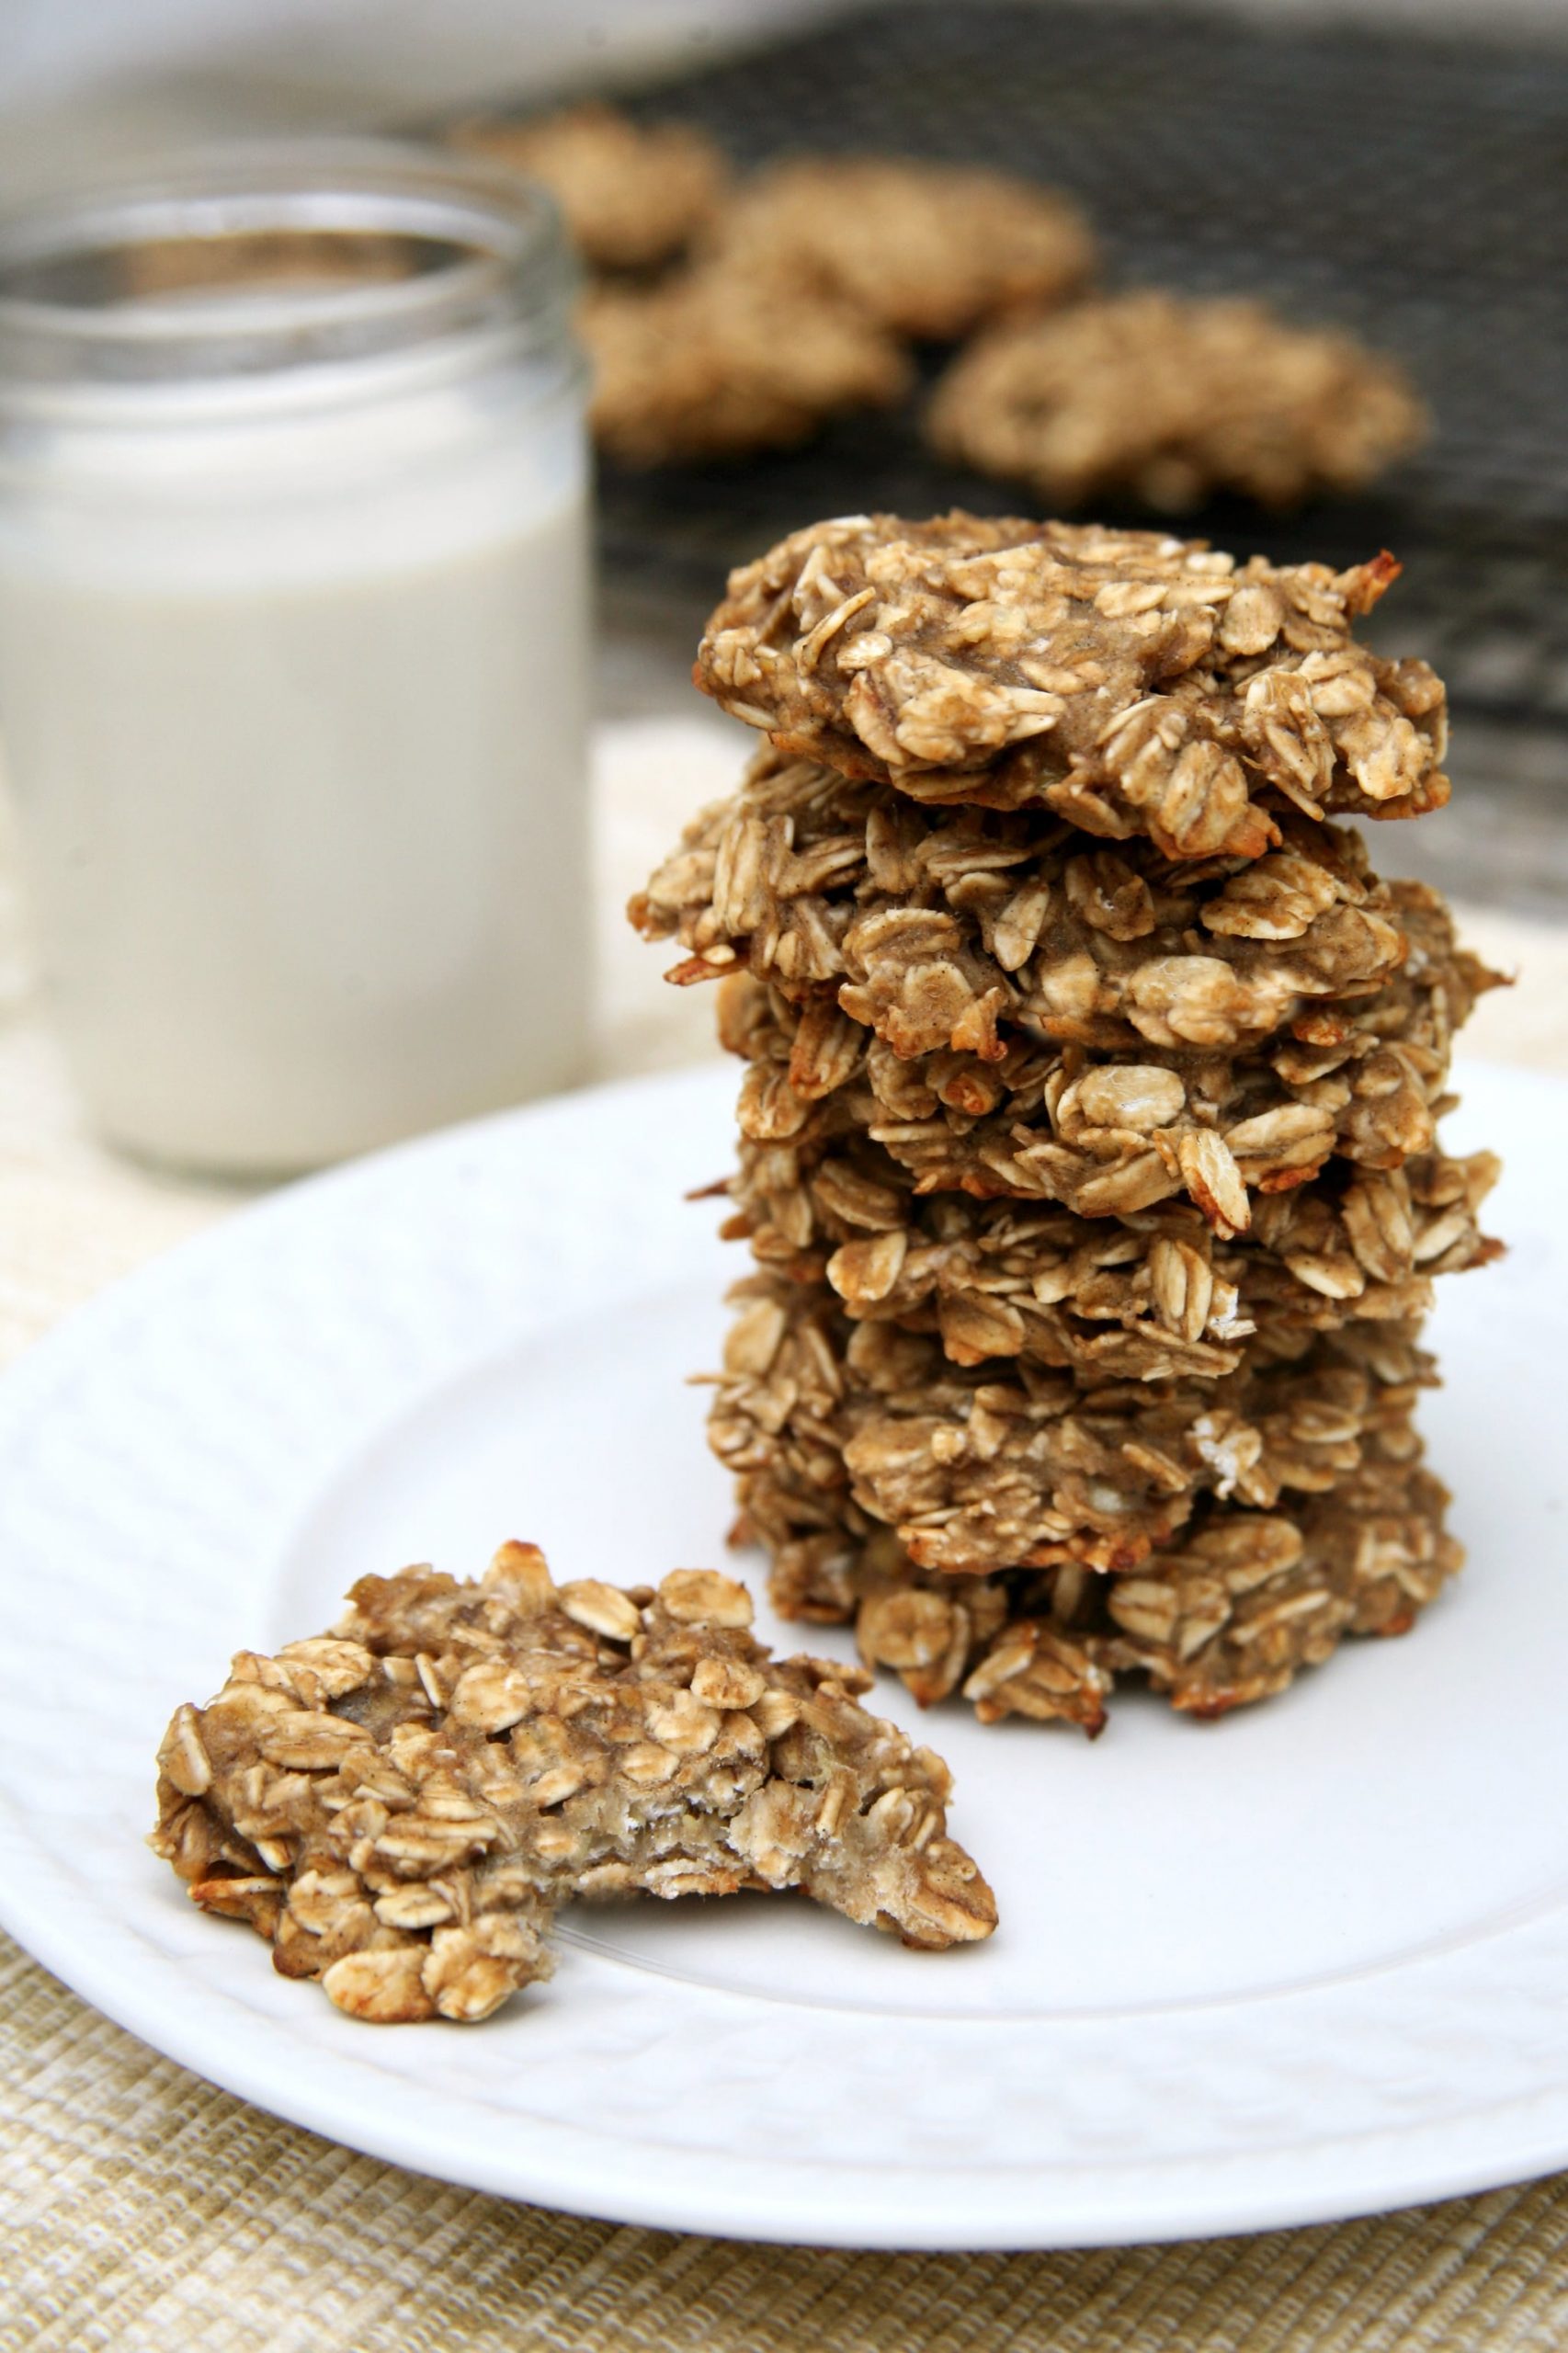 12 Low-Calorie, Protein-Packed, Easy-to-Make Snack Recipes